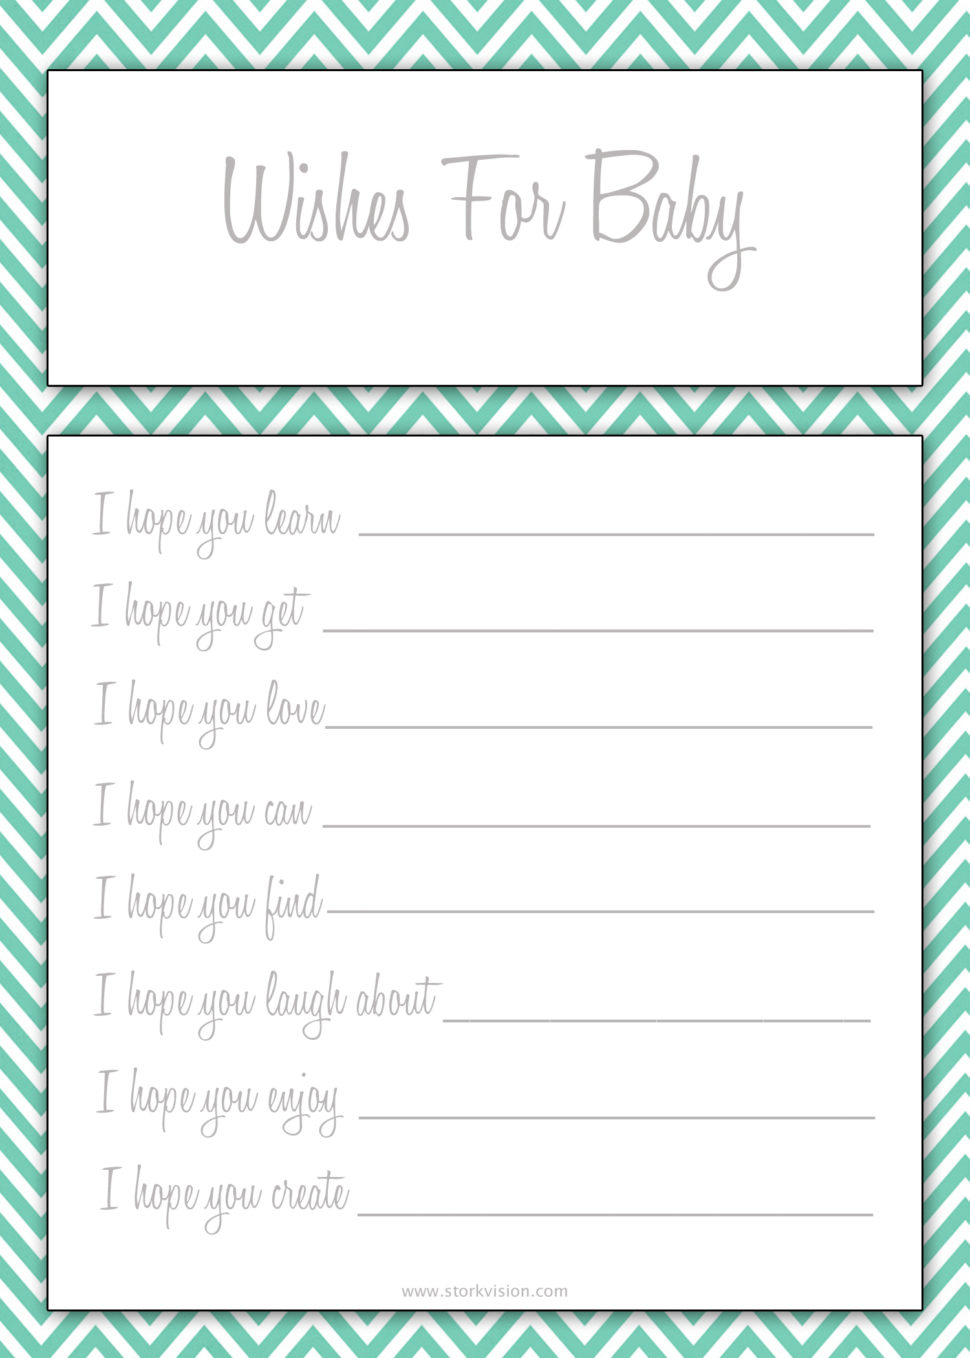 Medium Size of Baby Shower:stylish Baby Shower Wishes Picture Inspirations Baby Shower Food Ideas With Baby Shower Gift List Plus Comida Para Baby Shower Together With Baby Shower Registry